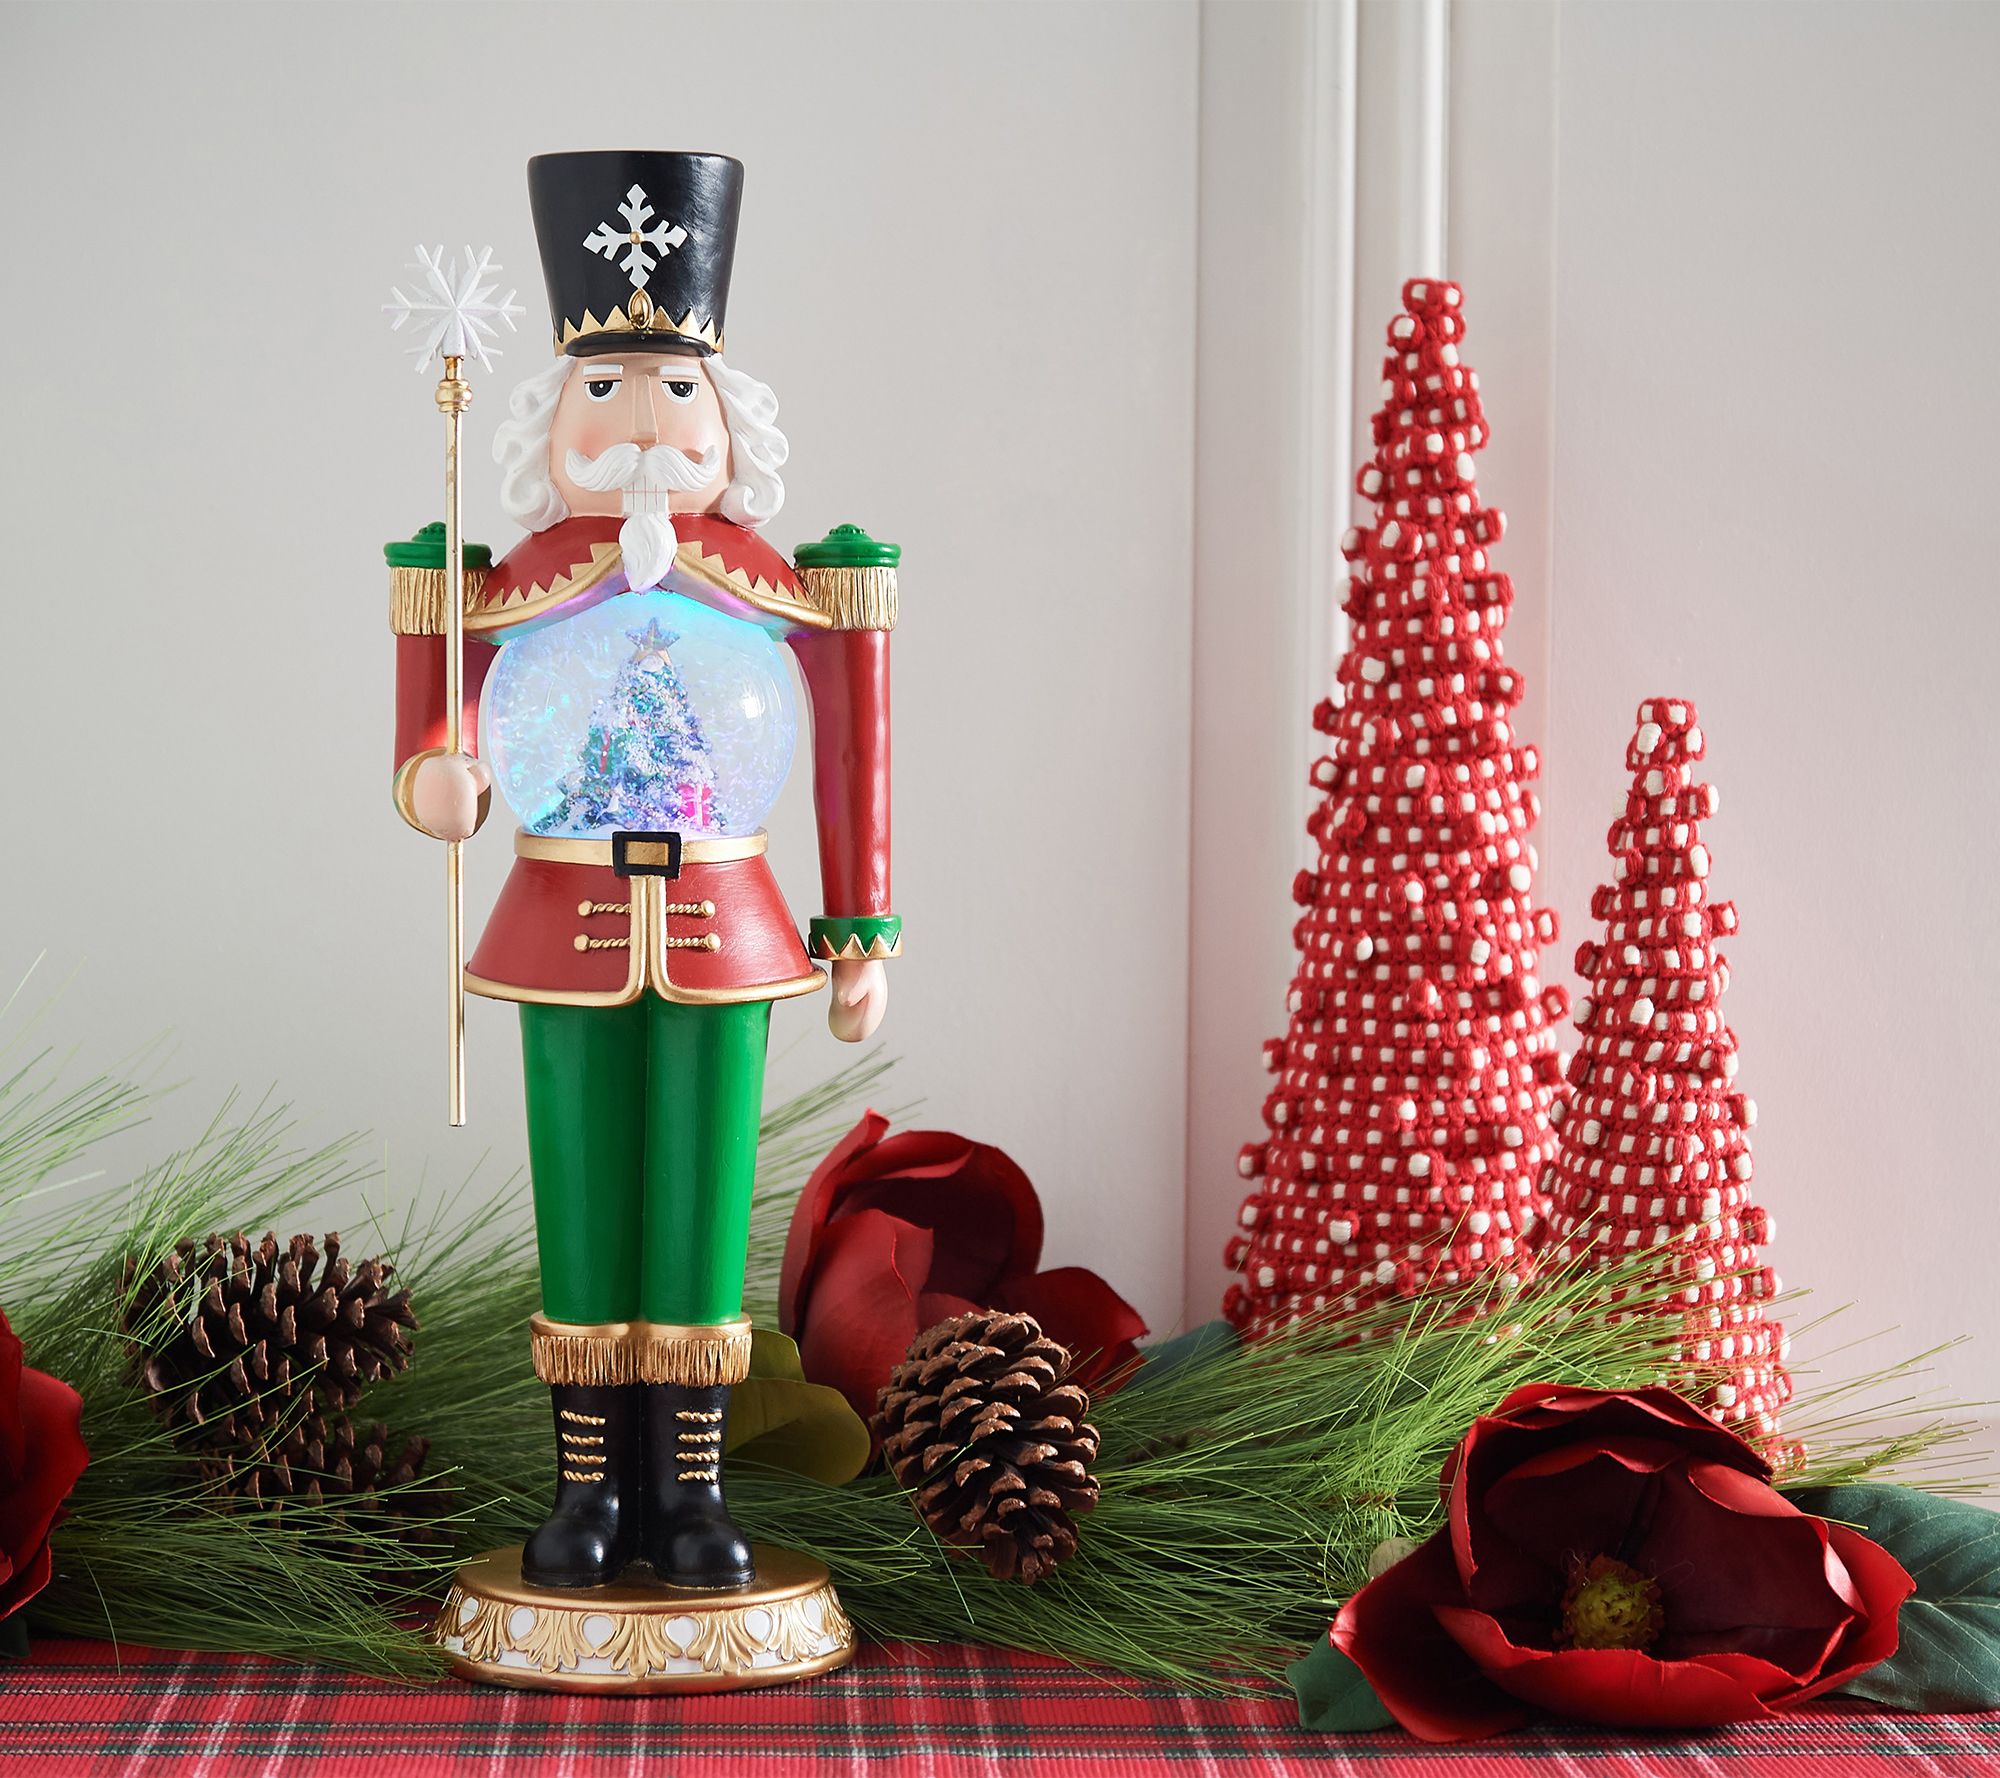 Kringle Express Holiday Character with Snow Globe Body 